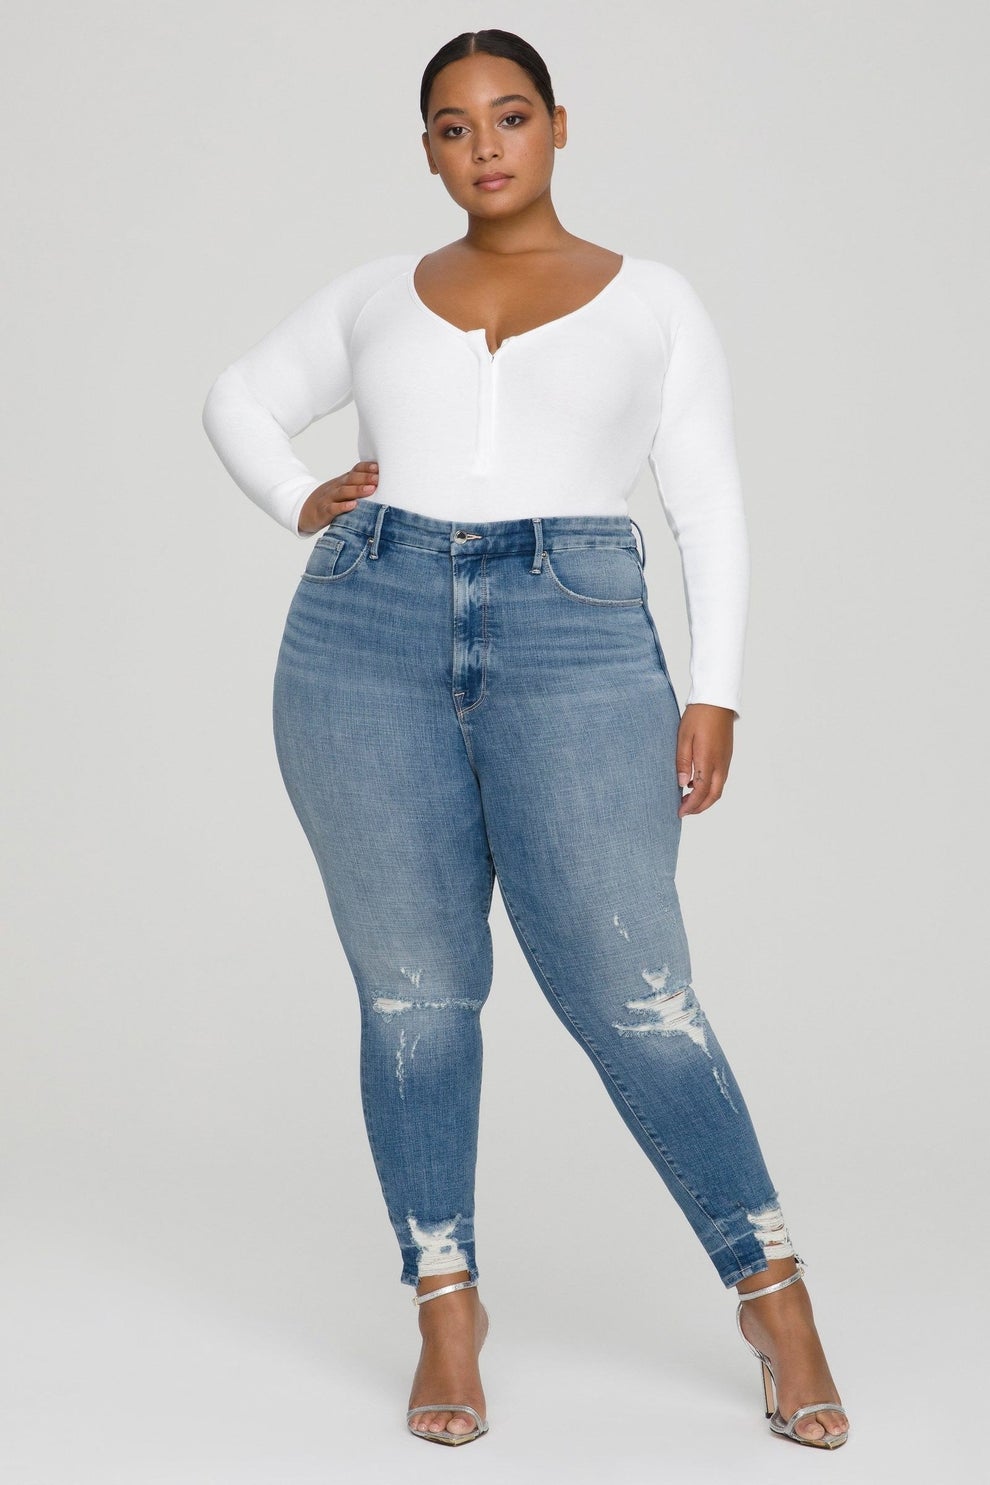 Diskurs Læring maskulinitet 15 Best Plus Size Jeans That Are *Actually* Comfortable